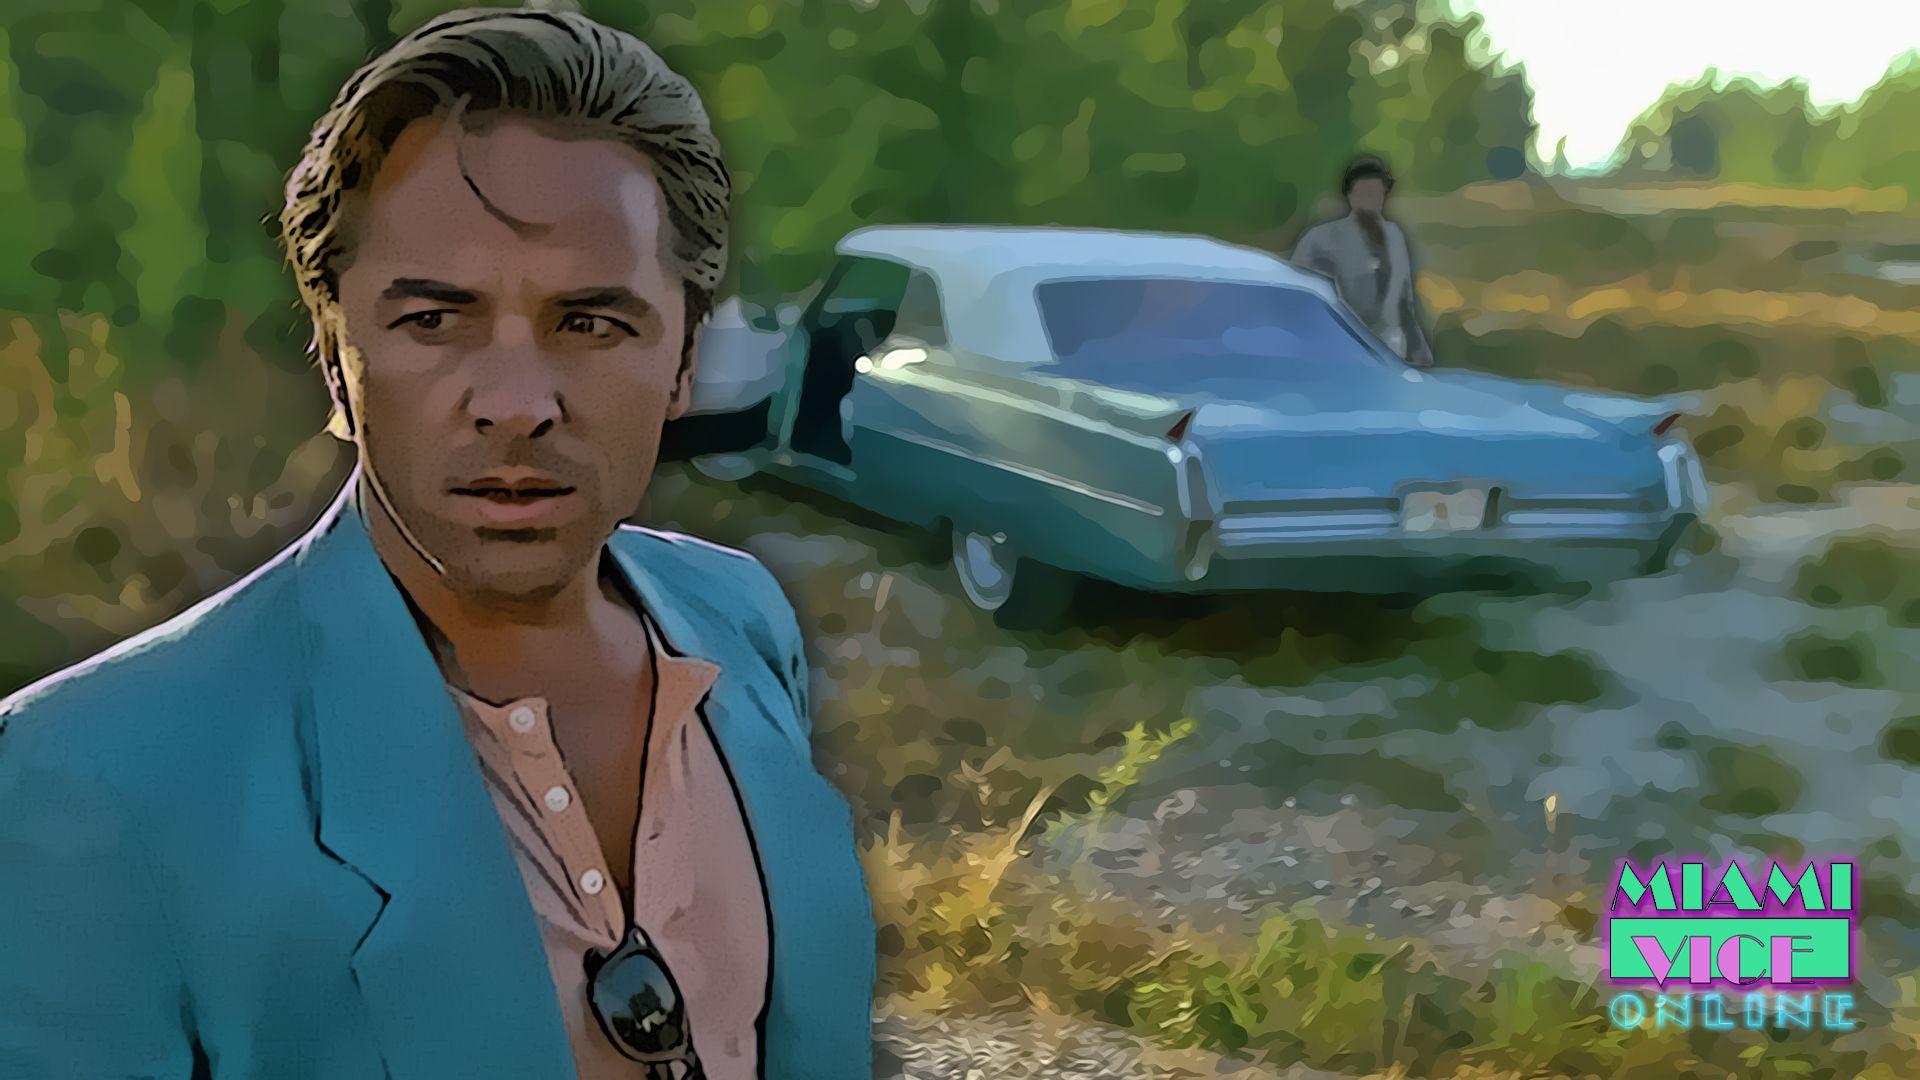 Miami Vice Online Official Wallpaper Vice In Any Other